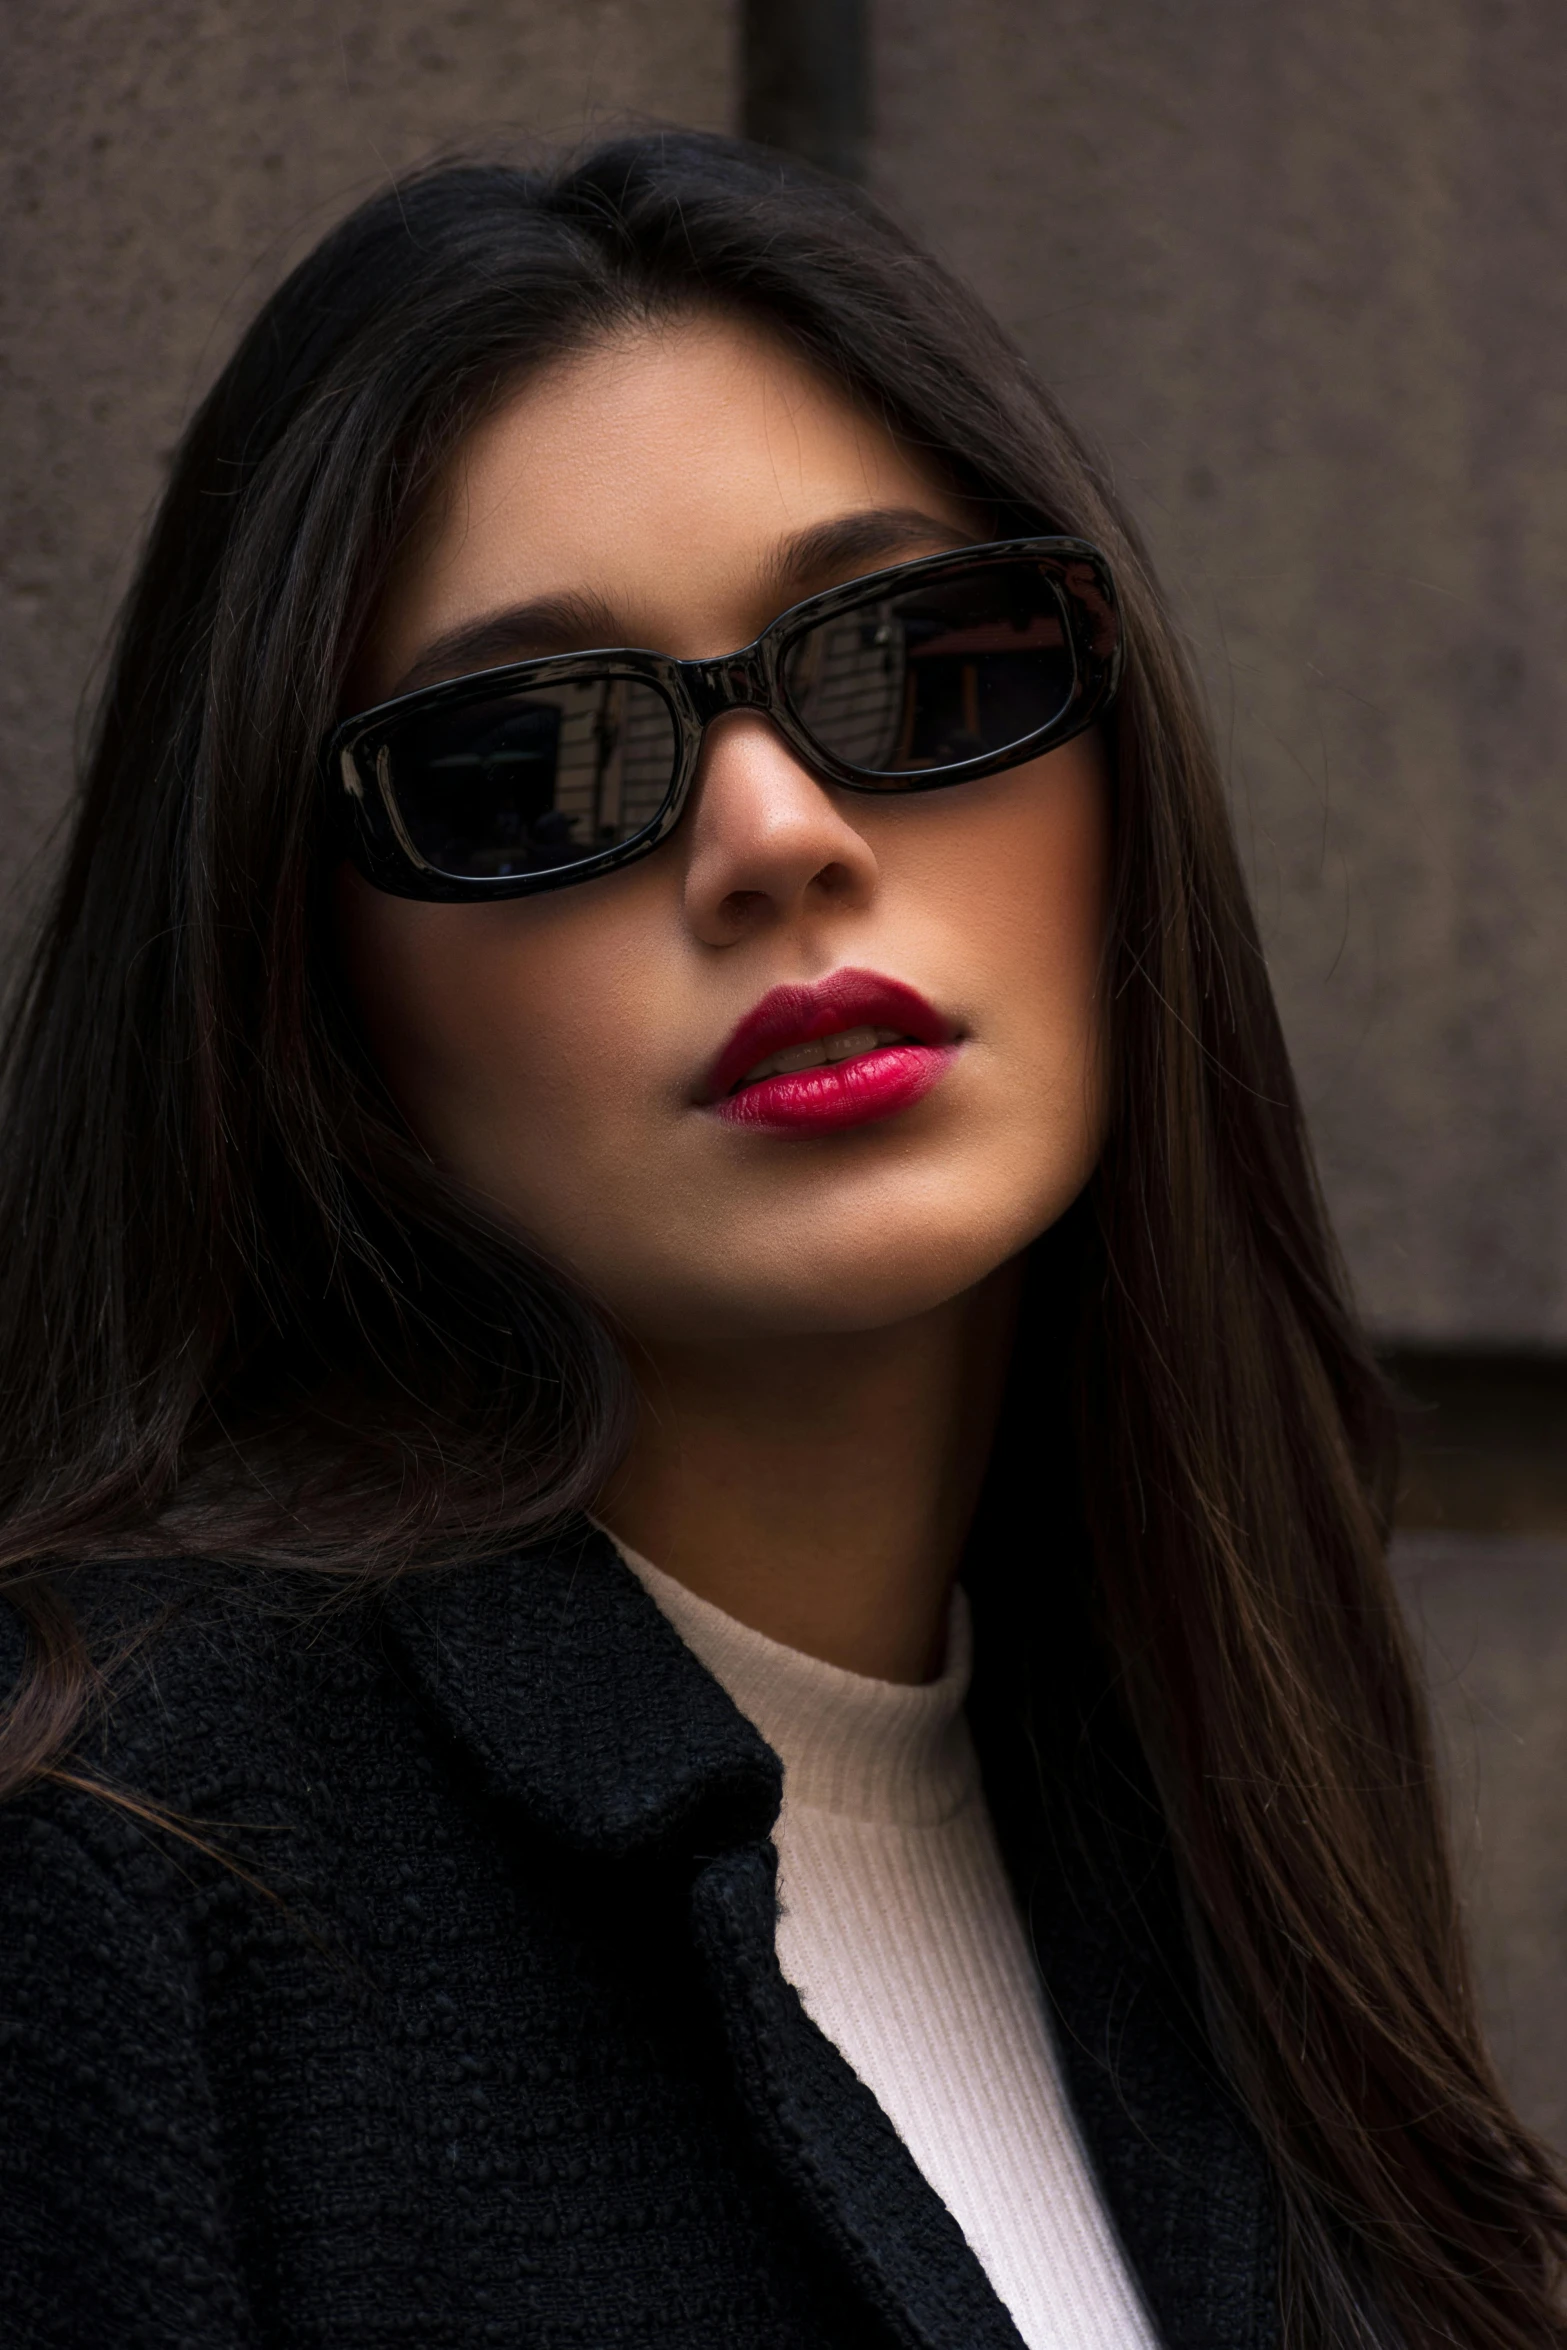 an attractive woman wearing sunglasses is posing for the camera